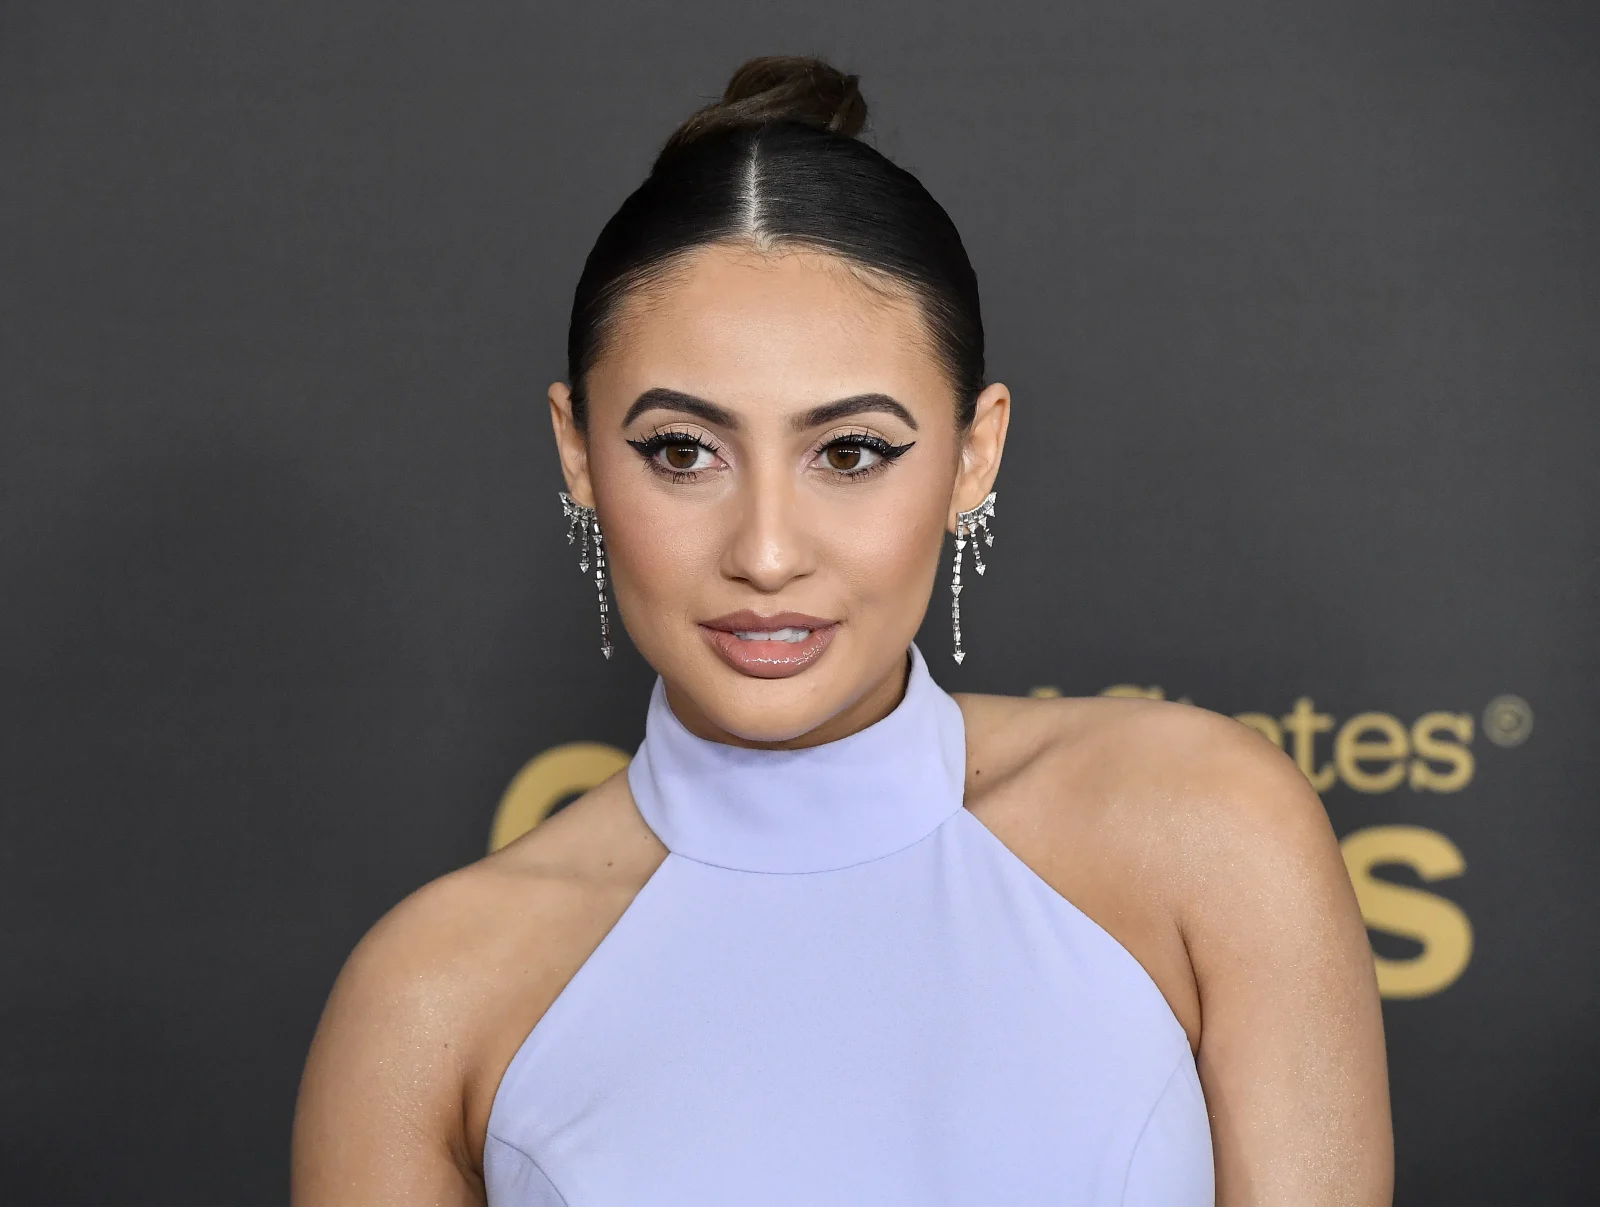 Francia Raisa Biography Height Weight Age Movies Husband Family Salary Net Worth Facts More.